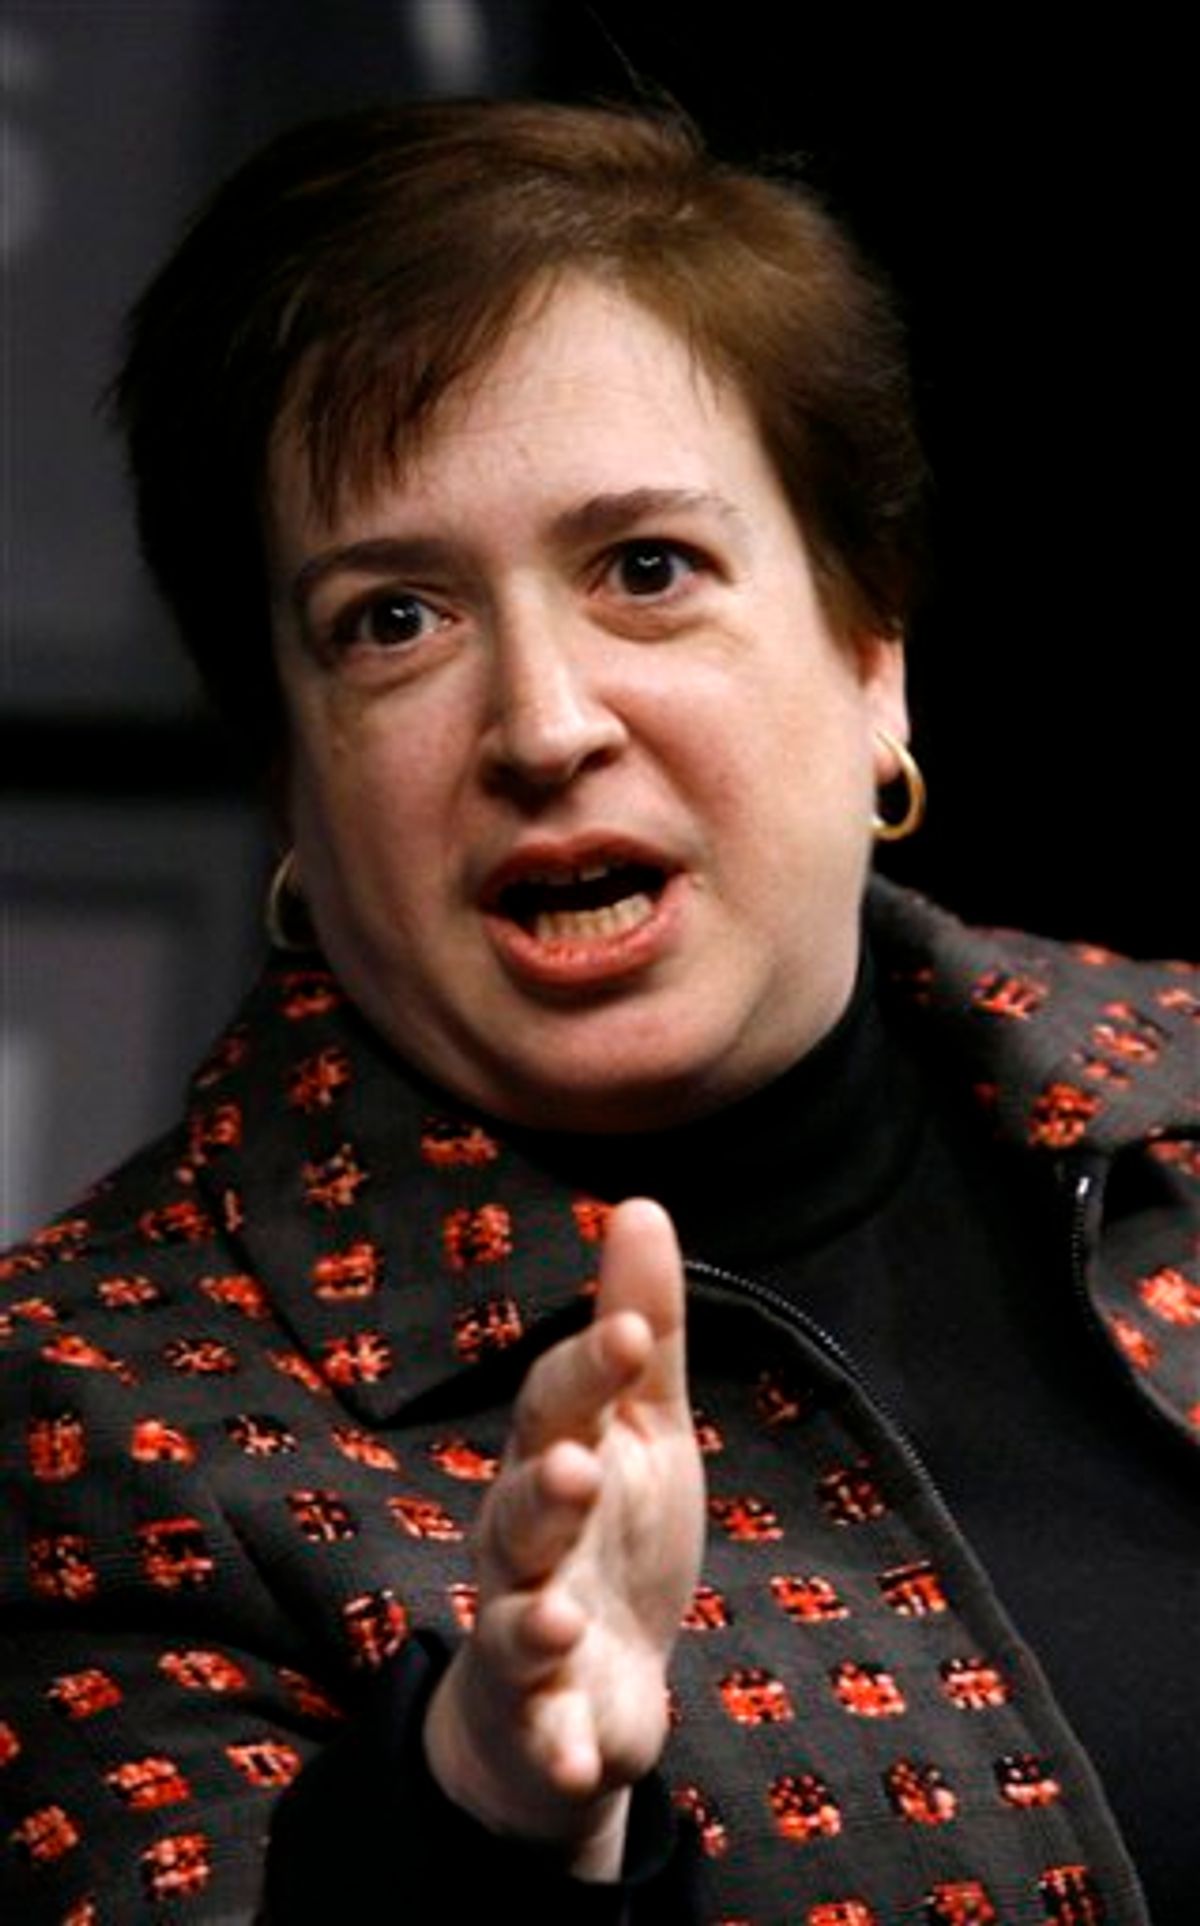 FILE - In this Jan. 28, 2010 file photo, U.S. Solicitor General Elena Kagan speaks during a panel about Women Advocates of the Supreme Court Bar at the Newseum in Washington. Liberals fear that after helping elect President Barack Obama he'll abandon them when he nominates a Supreme Court justice, choosing a consensus-building moderate rather than a liberal in the mold of retiring Justice John Paul Stevens. (AP Photo/Jose Luis Magana, File)   (AP)